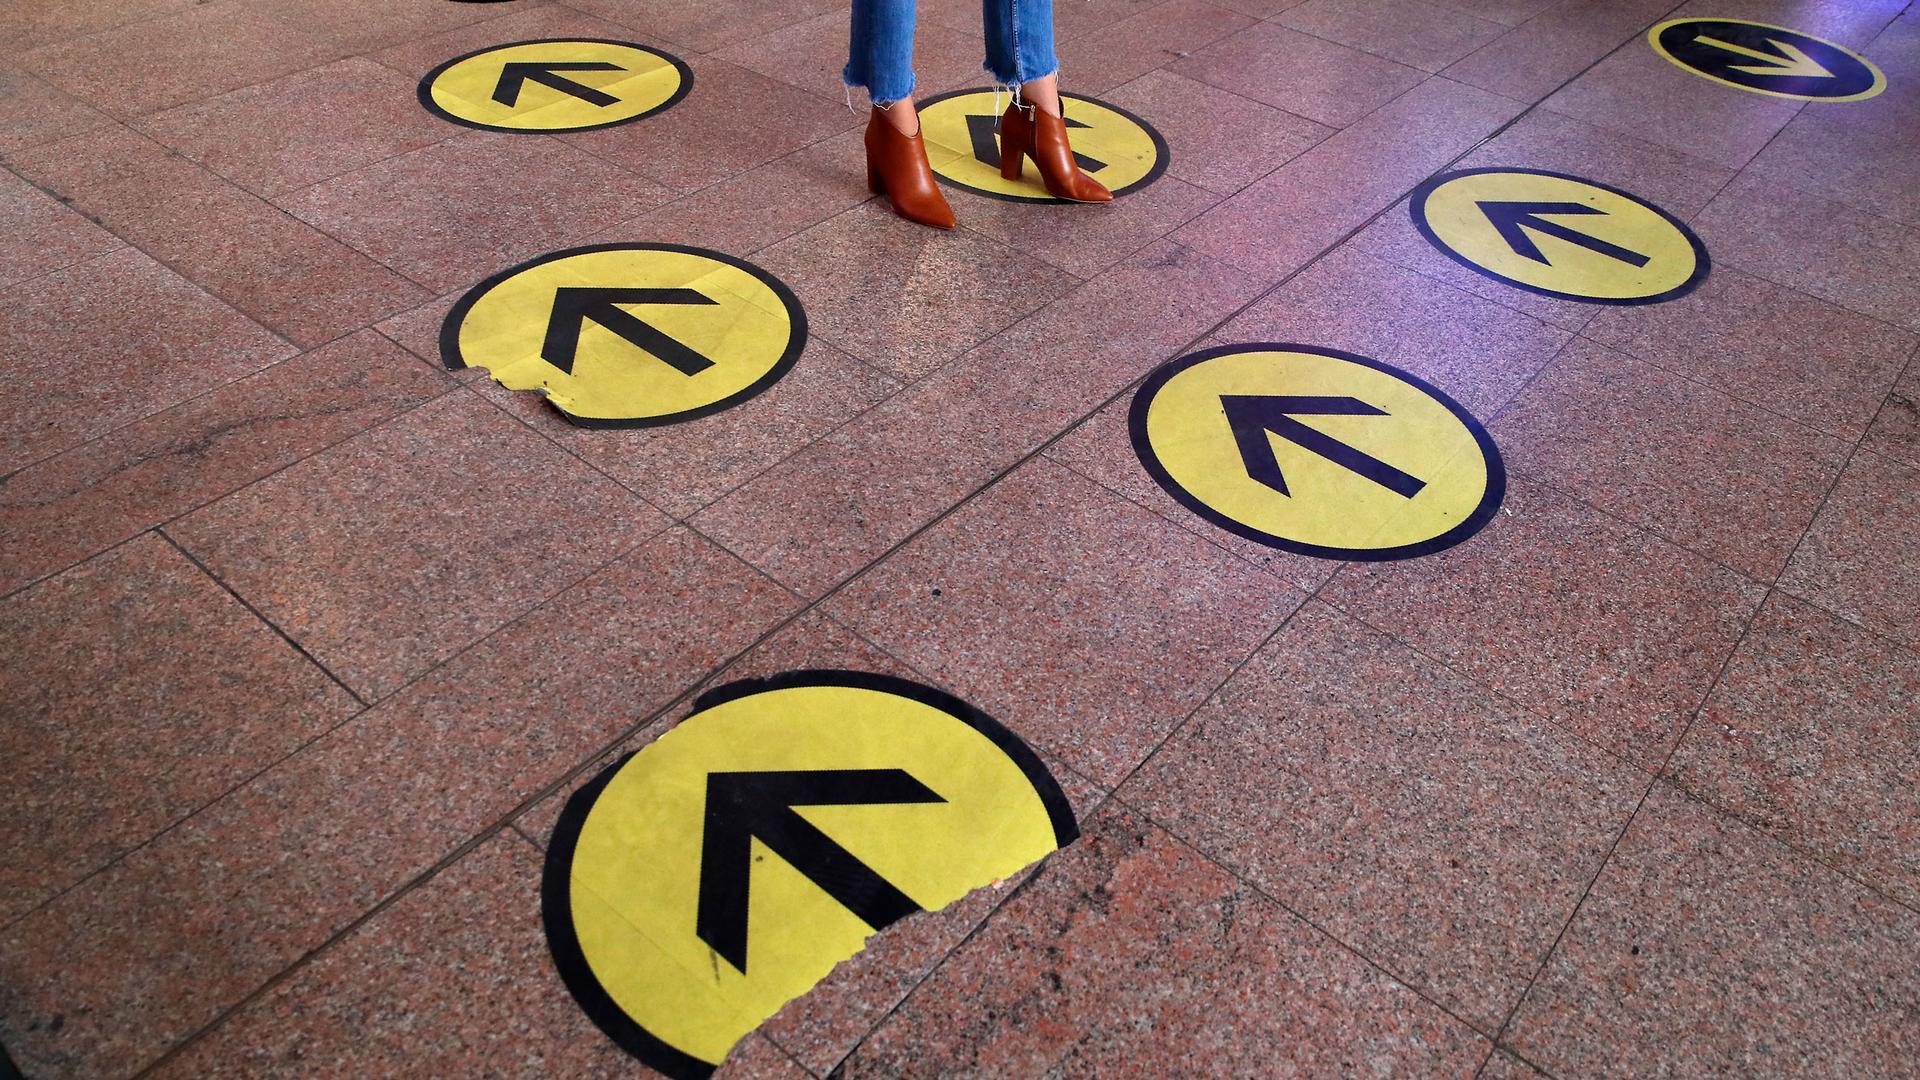 Several large stickers are shown on the floor with yellow and black arrows with a person standing on one arrow going the opposite direction.